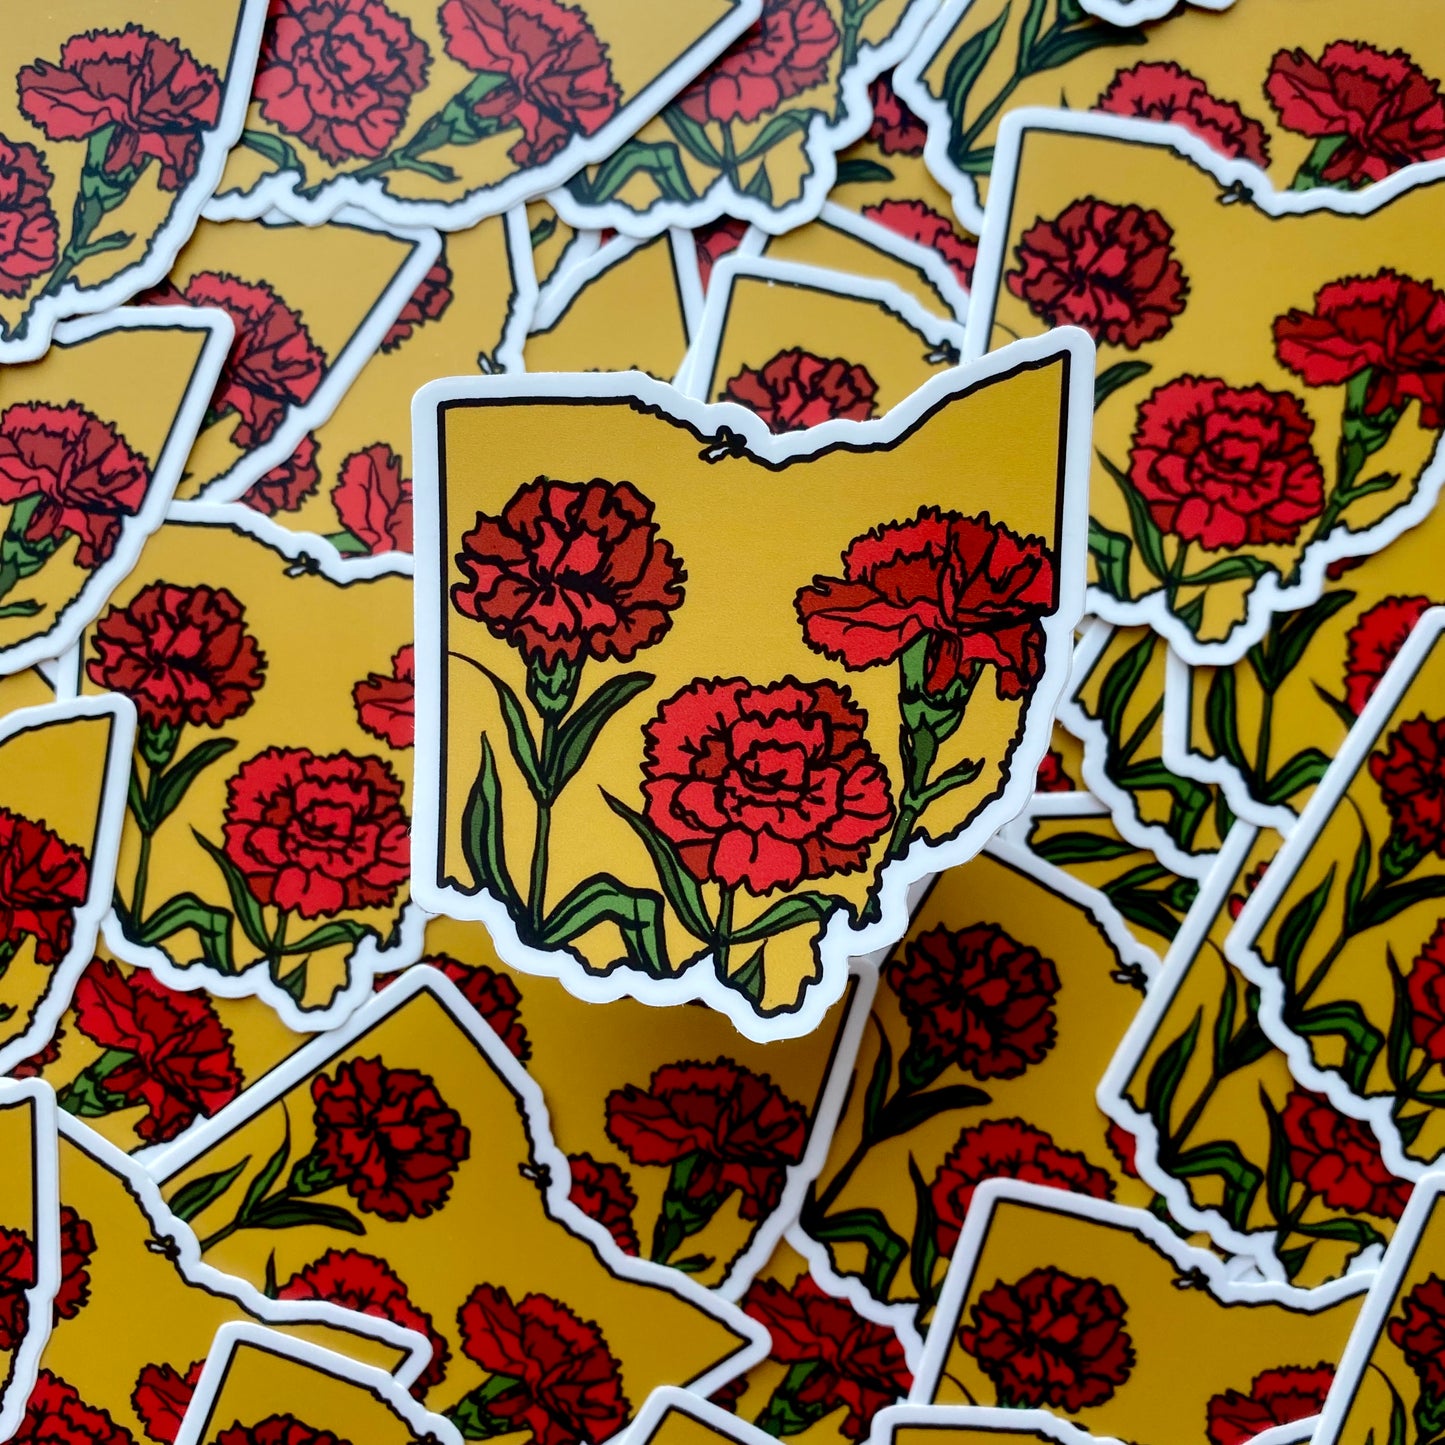 Ohio Carnation Sticker Early Version - Limited